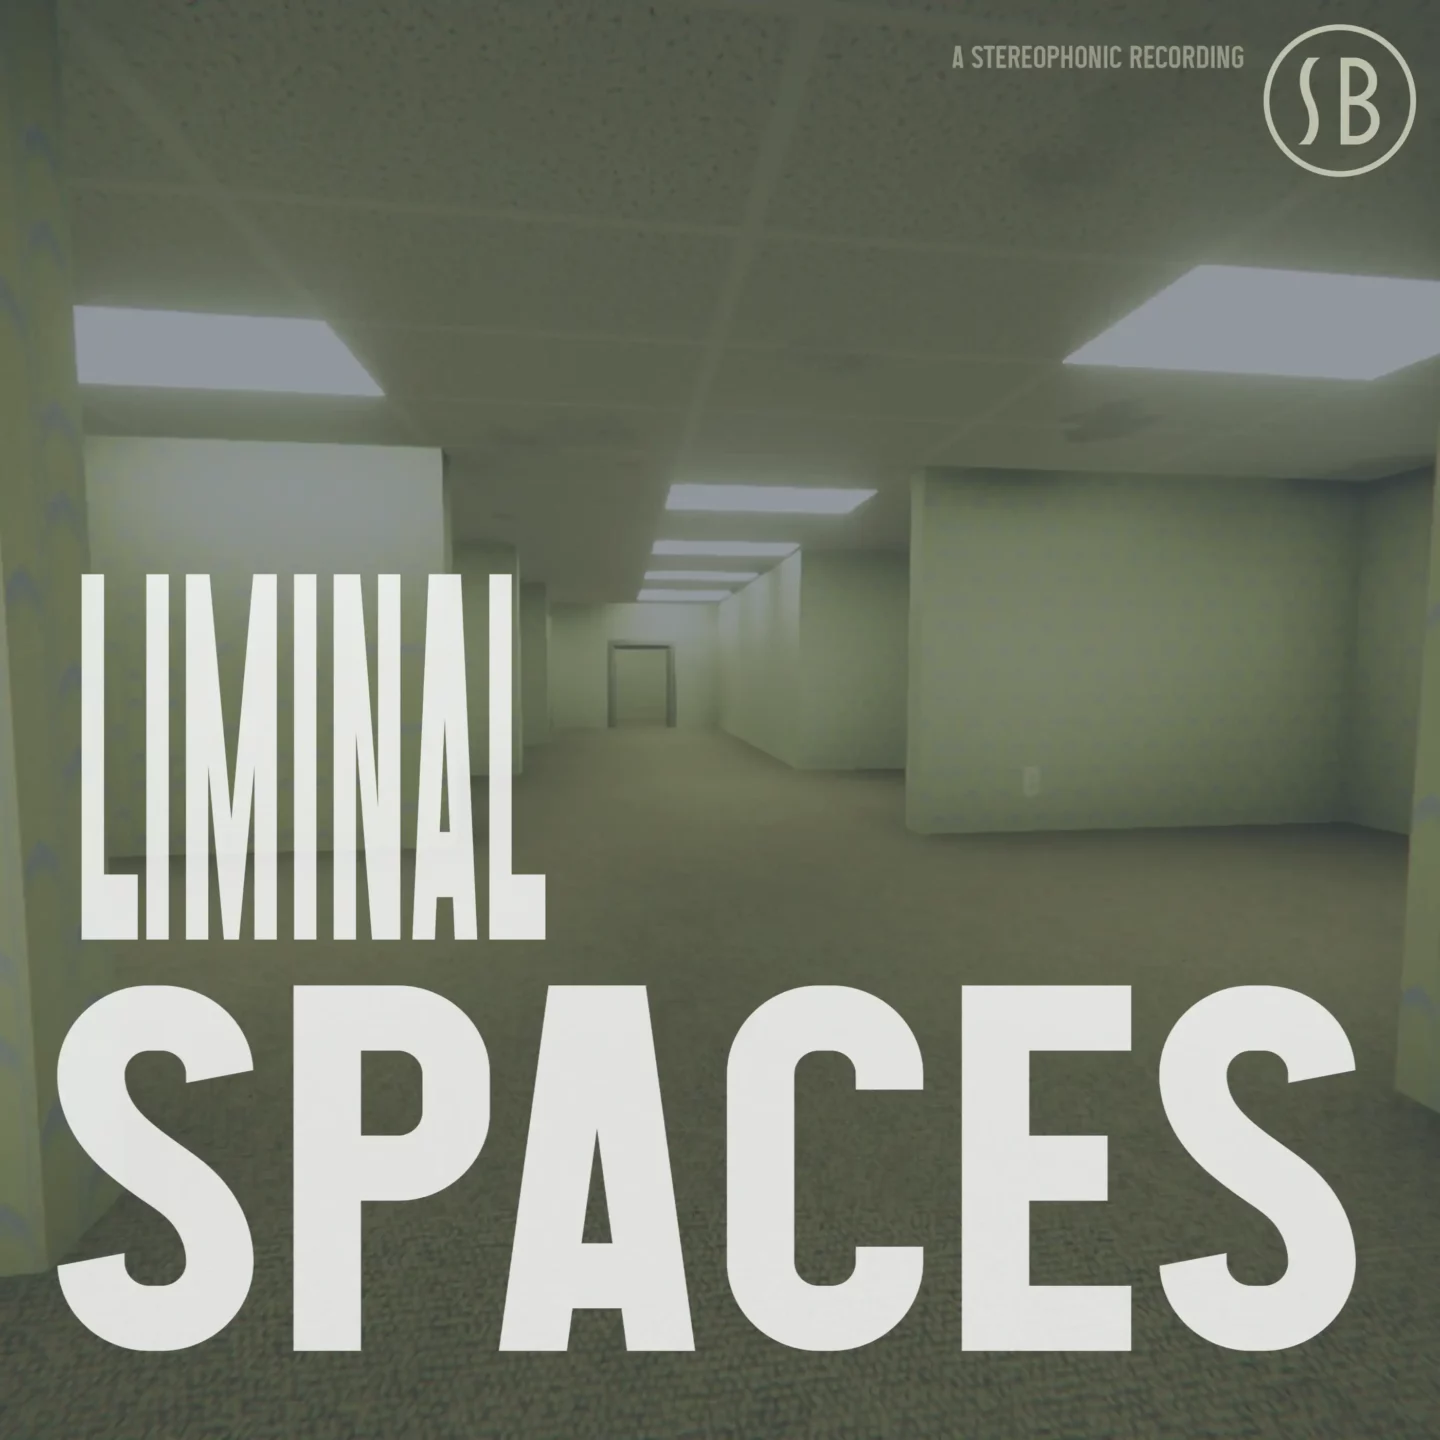 Album cover art for Liminal Spaces